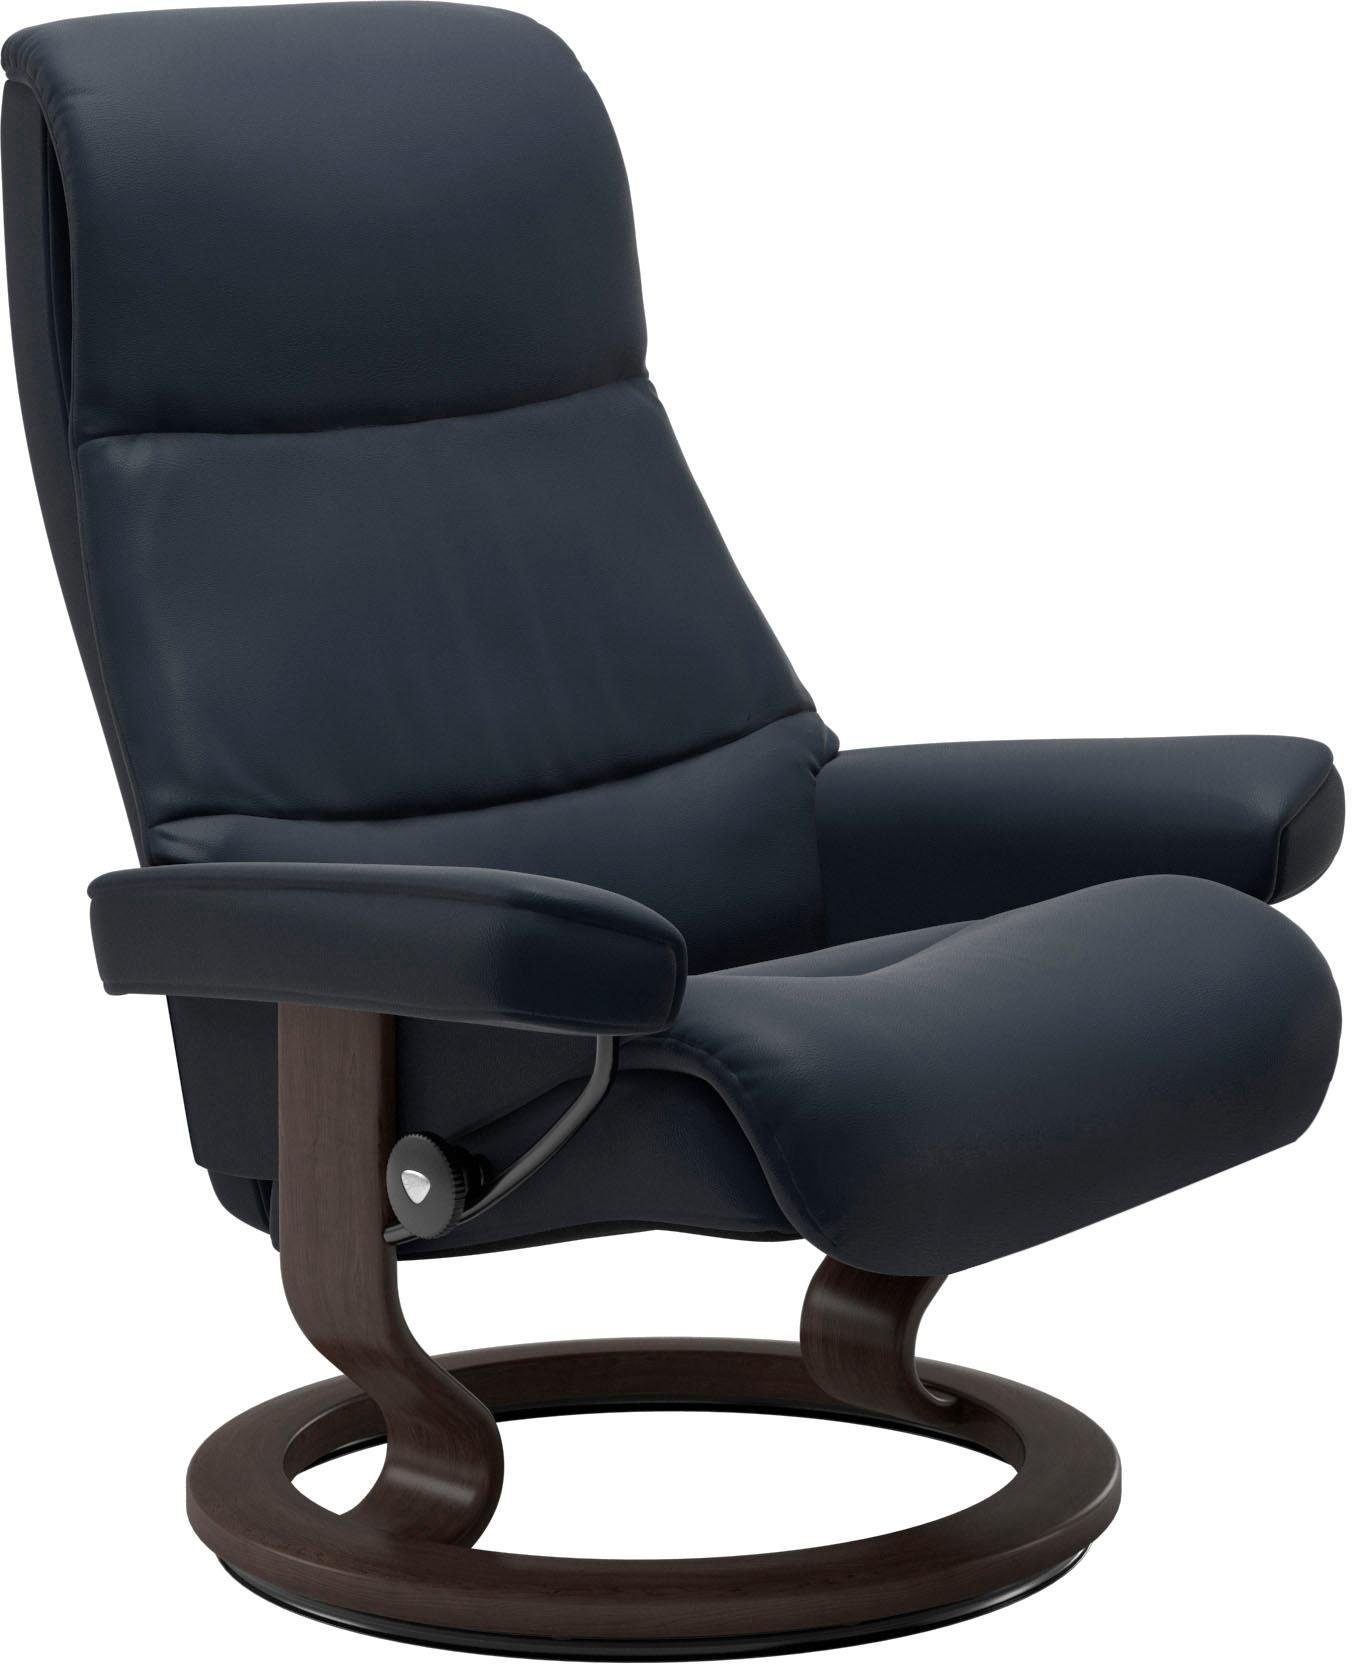 Classic Stressless® Größe mit S,Gestell Wenge View, Base, Relaxsessel